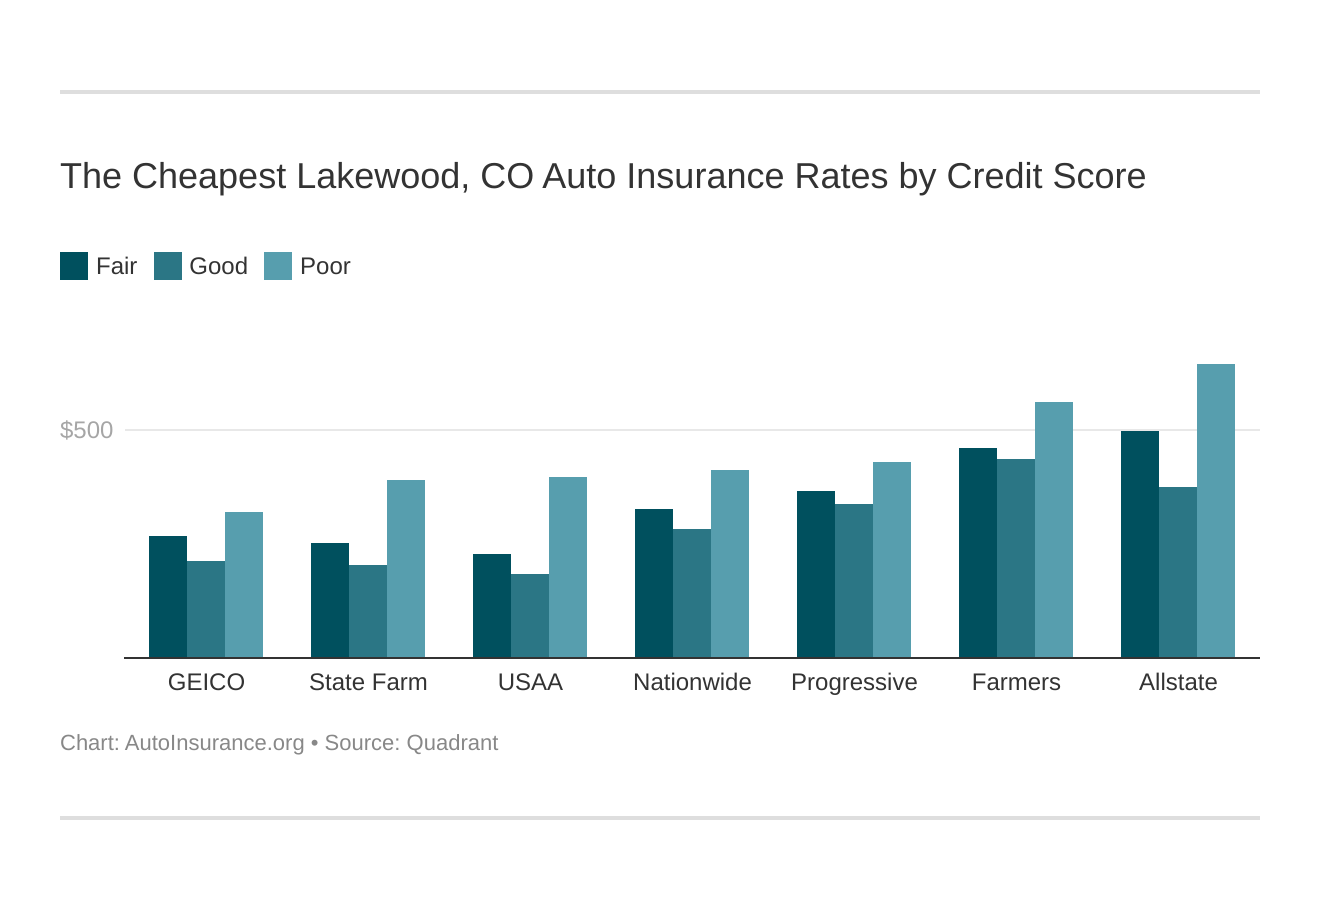 The Cheapest Lakewood, CO Auto Insurance Rates by Credit Score